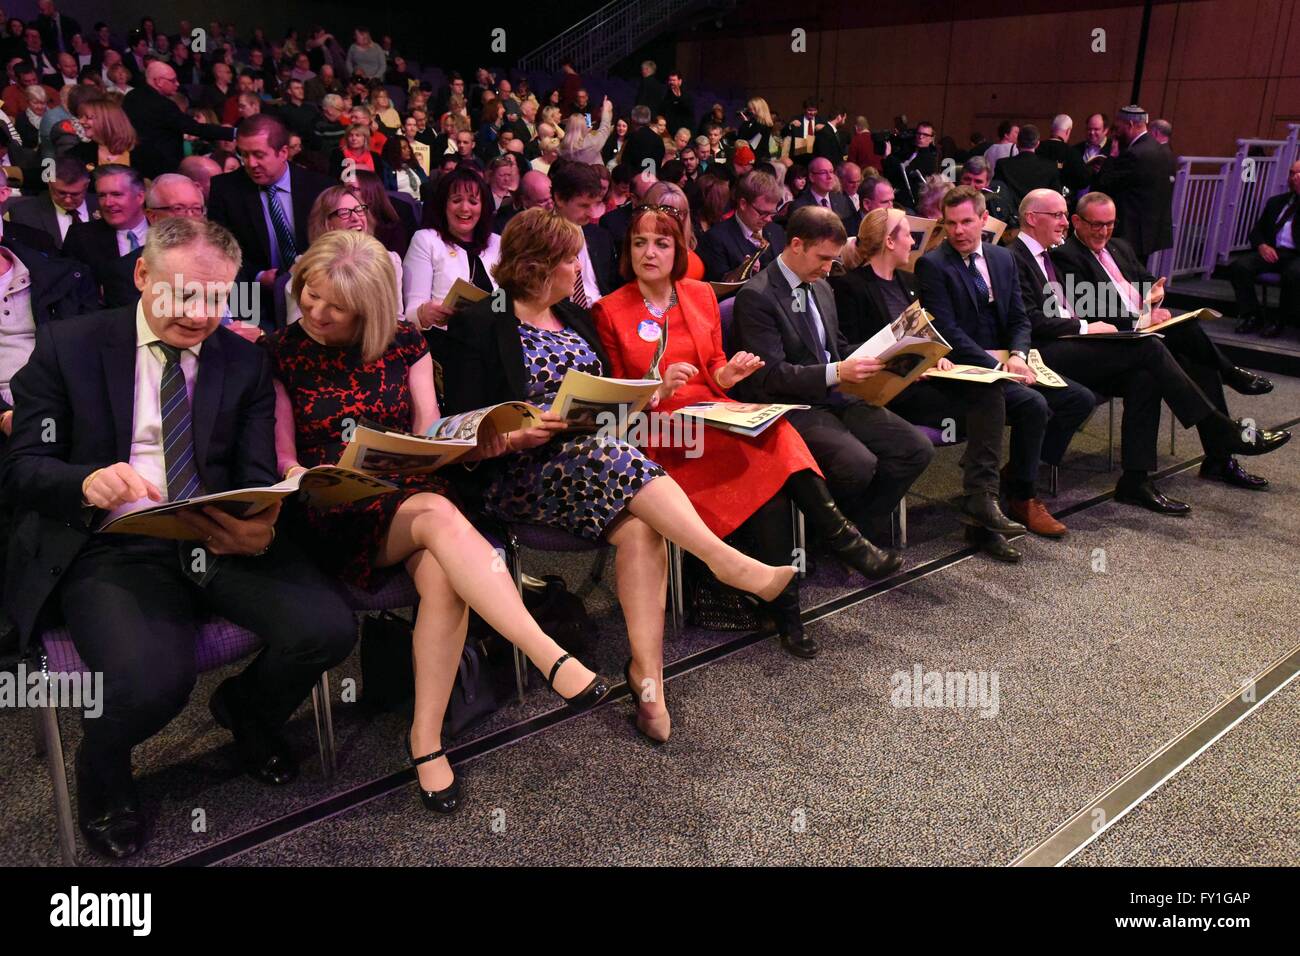 Edinburgh, Scotland, United Kingdom, 20, April, 2016. SNP Cabinet ministers (front row) study copies of the SNP manifesto for the Scottish Parliament elections at its launch in front of an invited audience of 1400 supporters, Credit:  Ken Jack / Alamy Live News Stock Photo